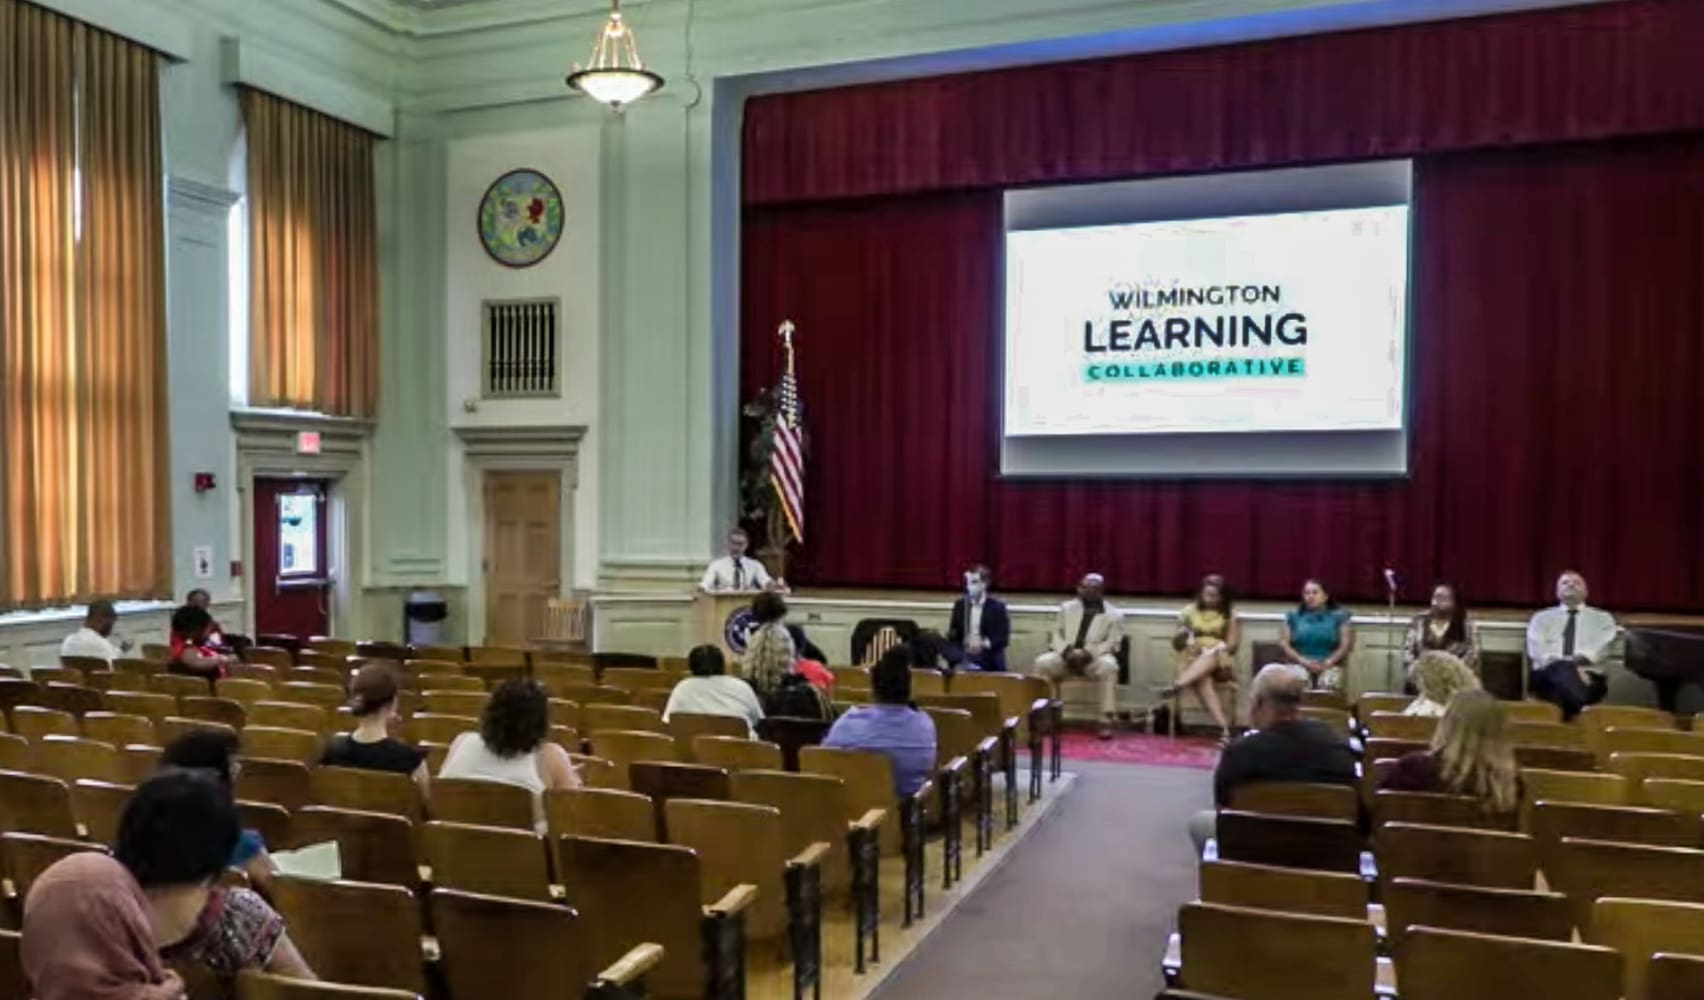 Featured image for “Brandywine says yes to Wilmington Learning Collab”